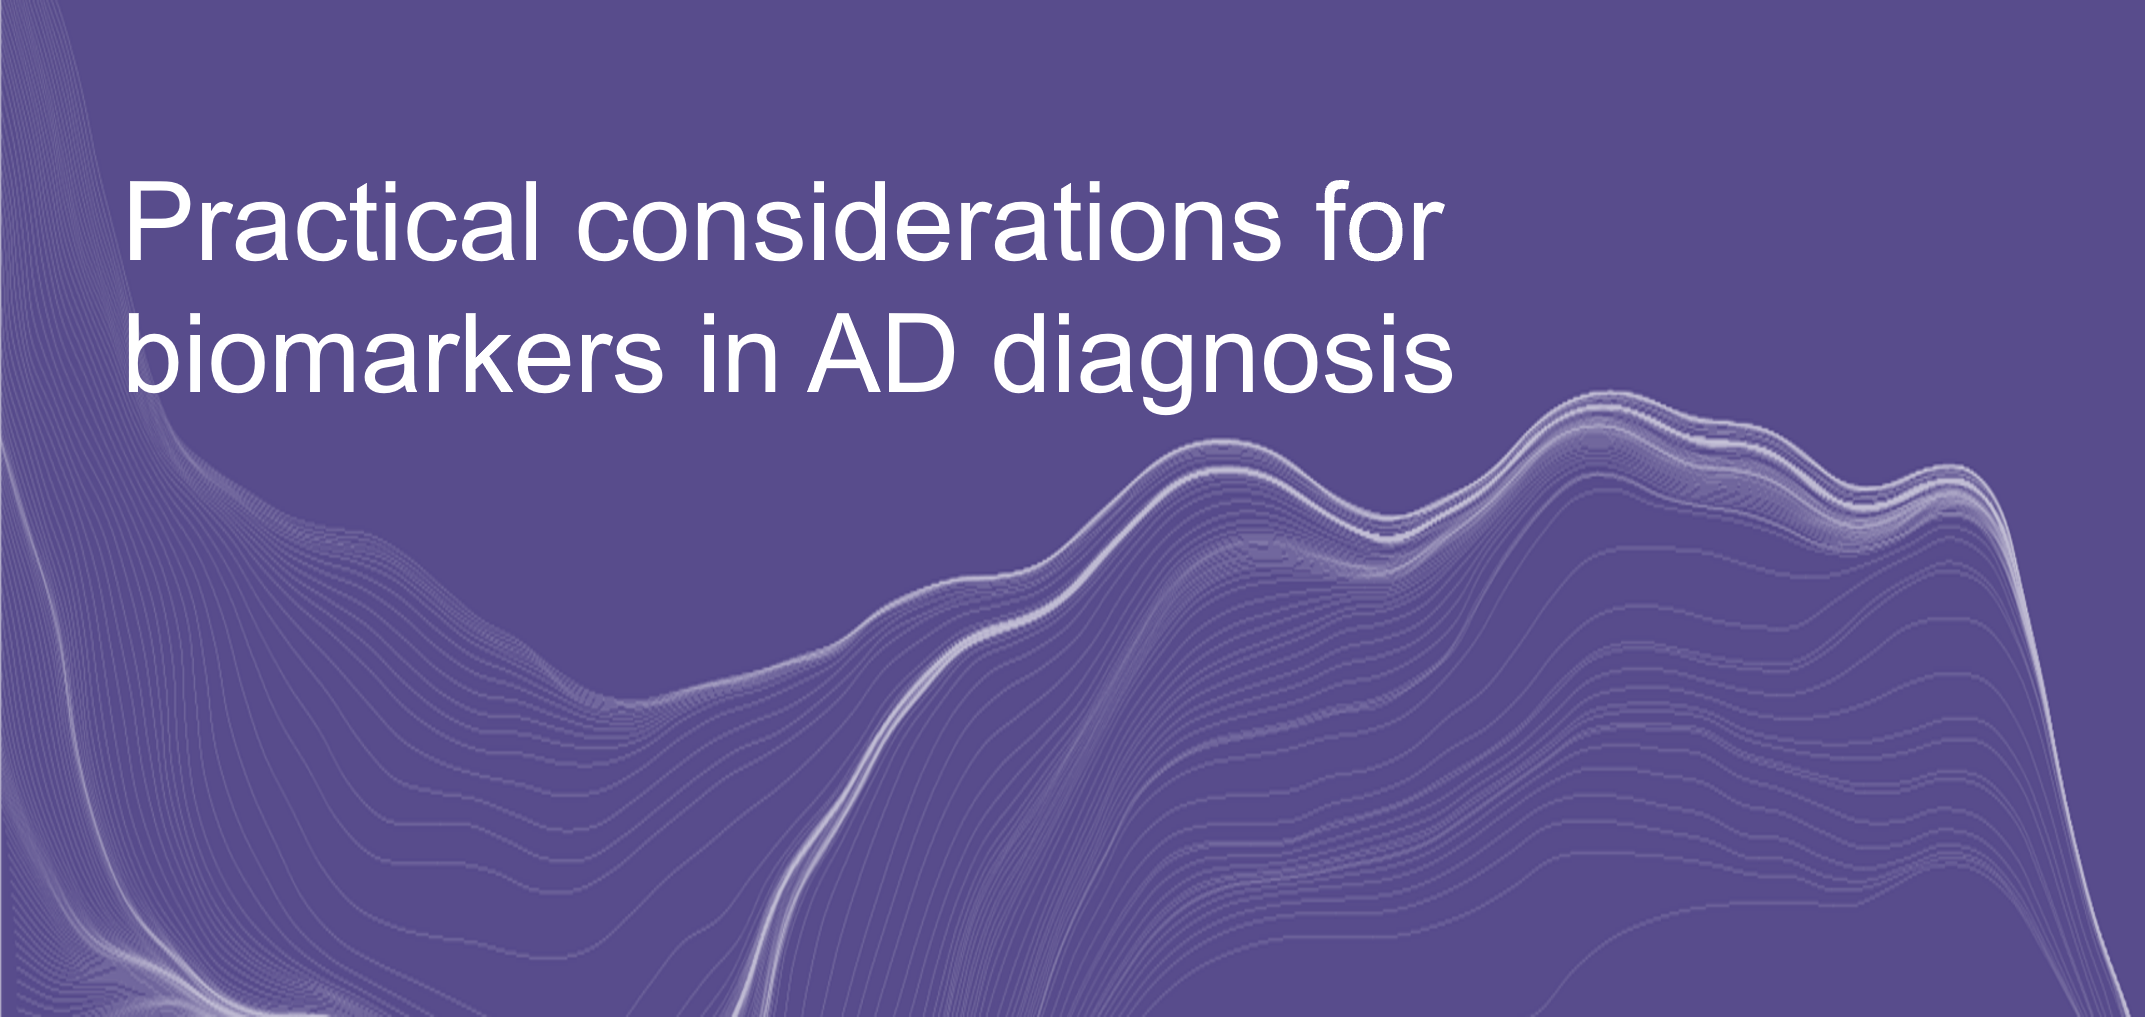 Practical considerations for AD biomarkers